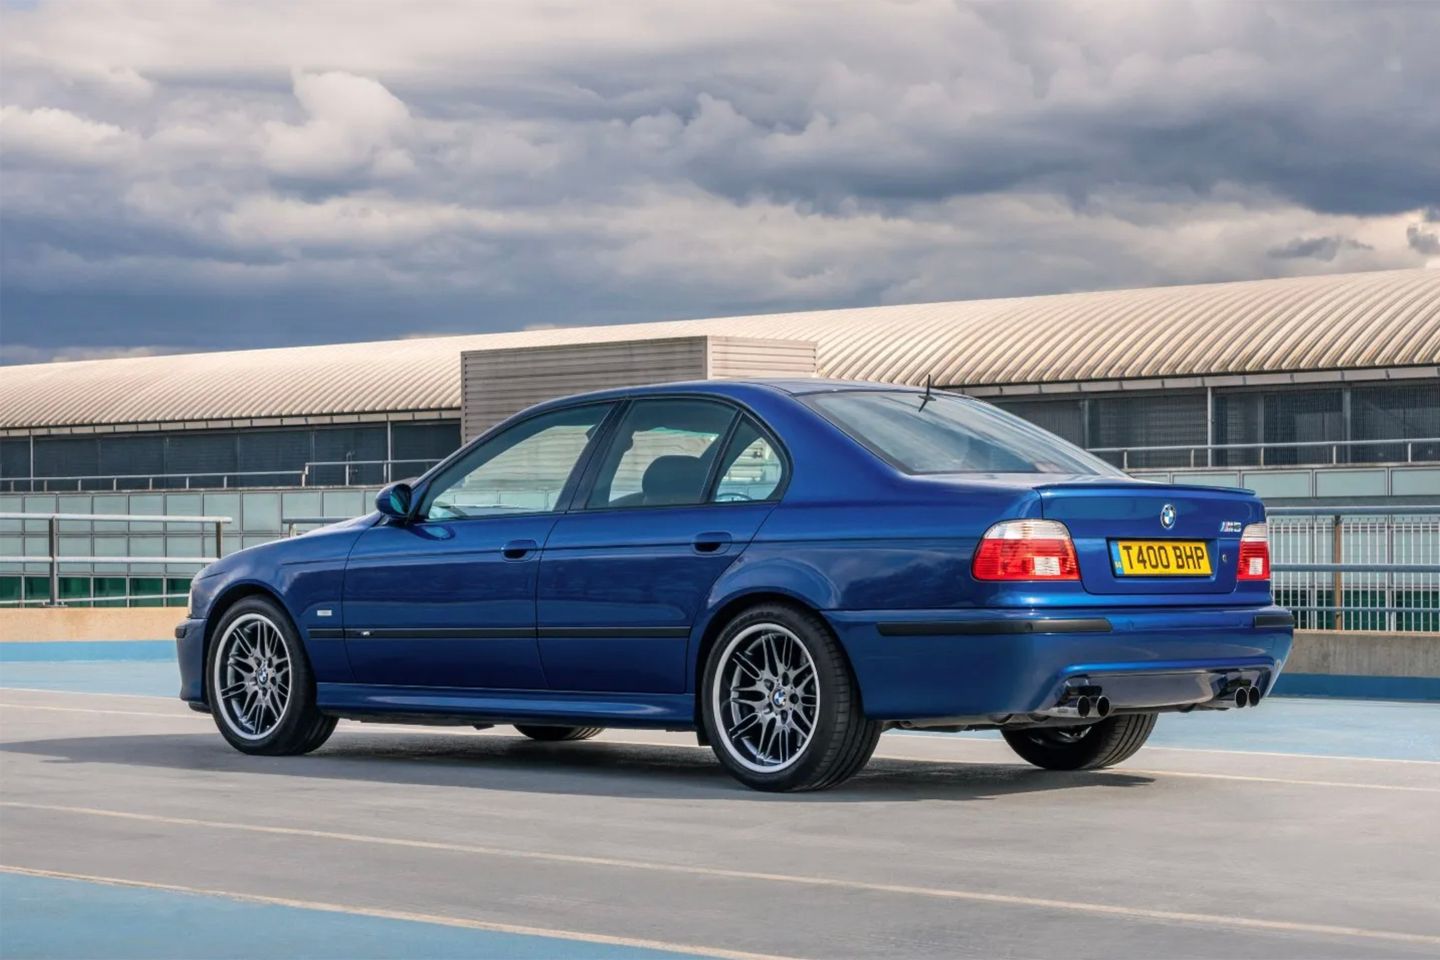 2000 BMW M5 E39 Detailed Video Review